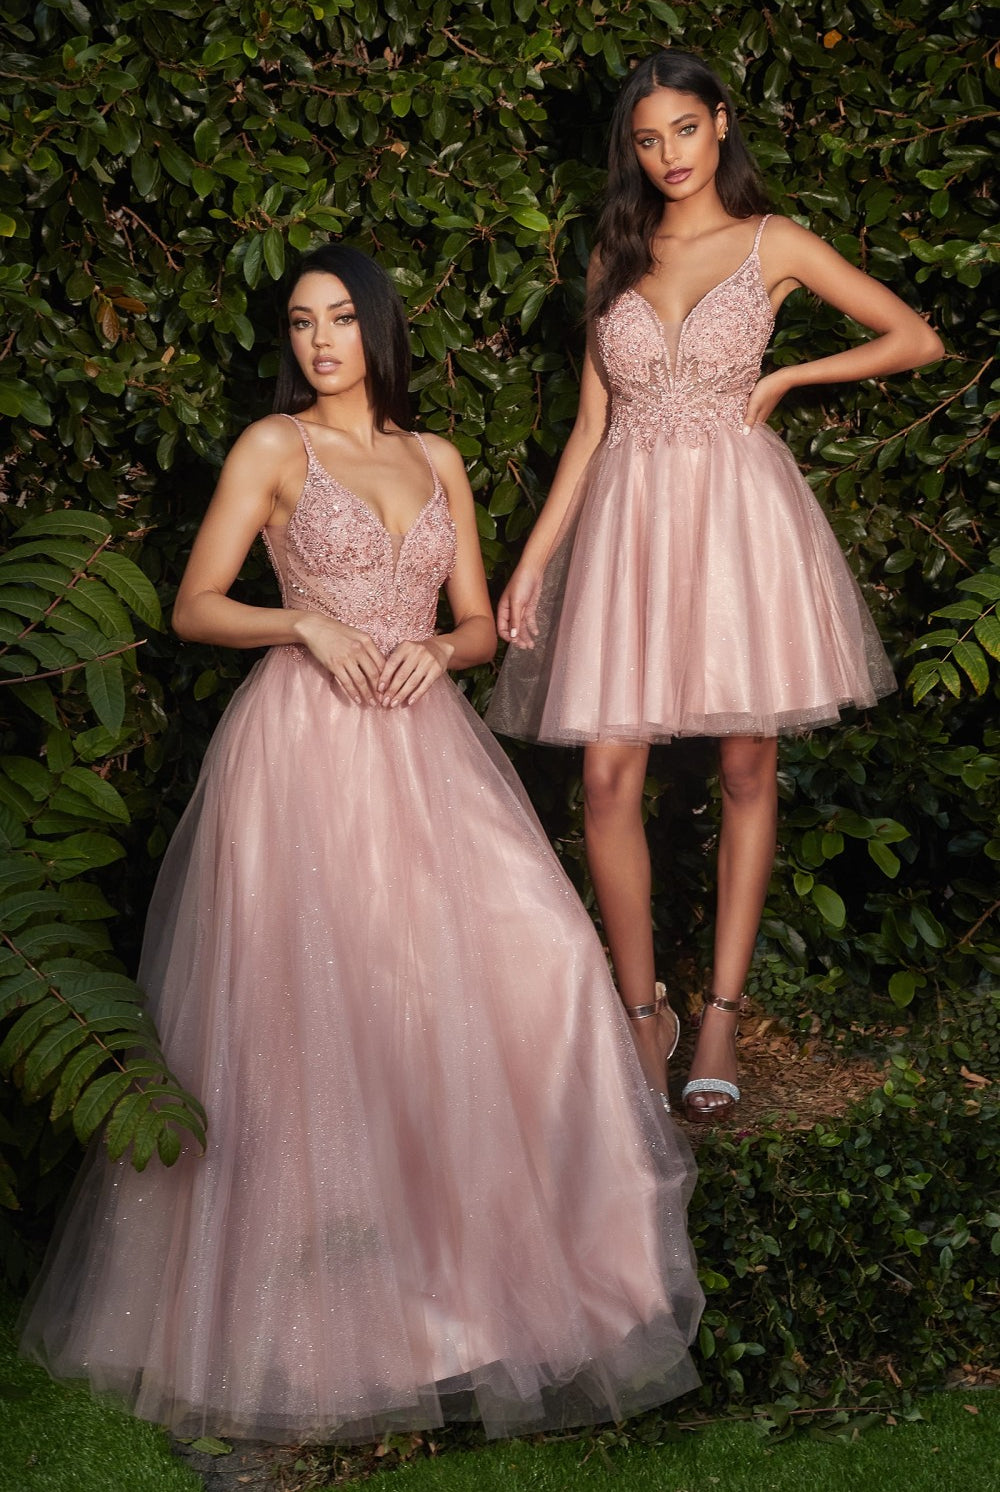 Layered Tulle A-Line Gown w/ Floral Laced V-neck & V- Back Bodice. Cute Vintage Evening Ball Dress-smcdress